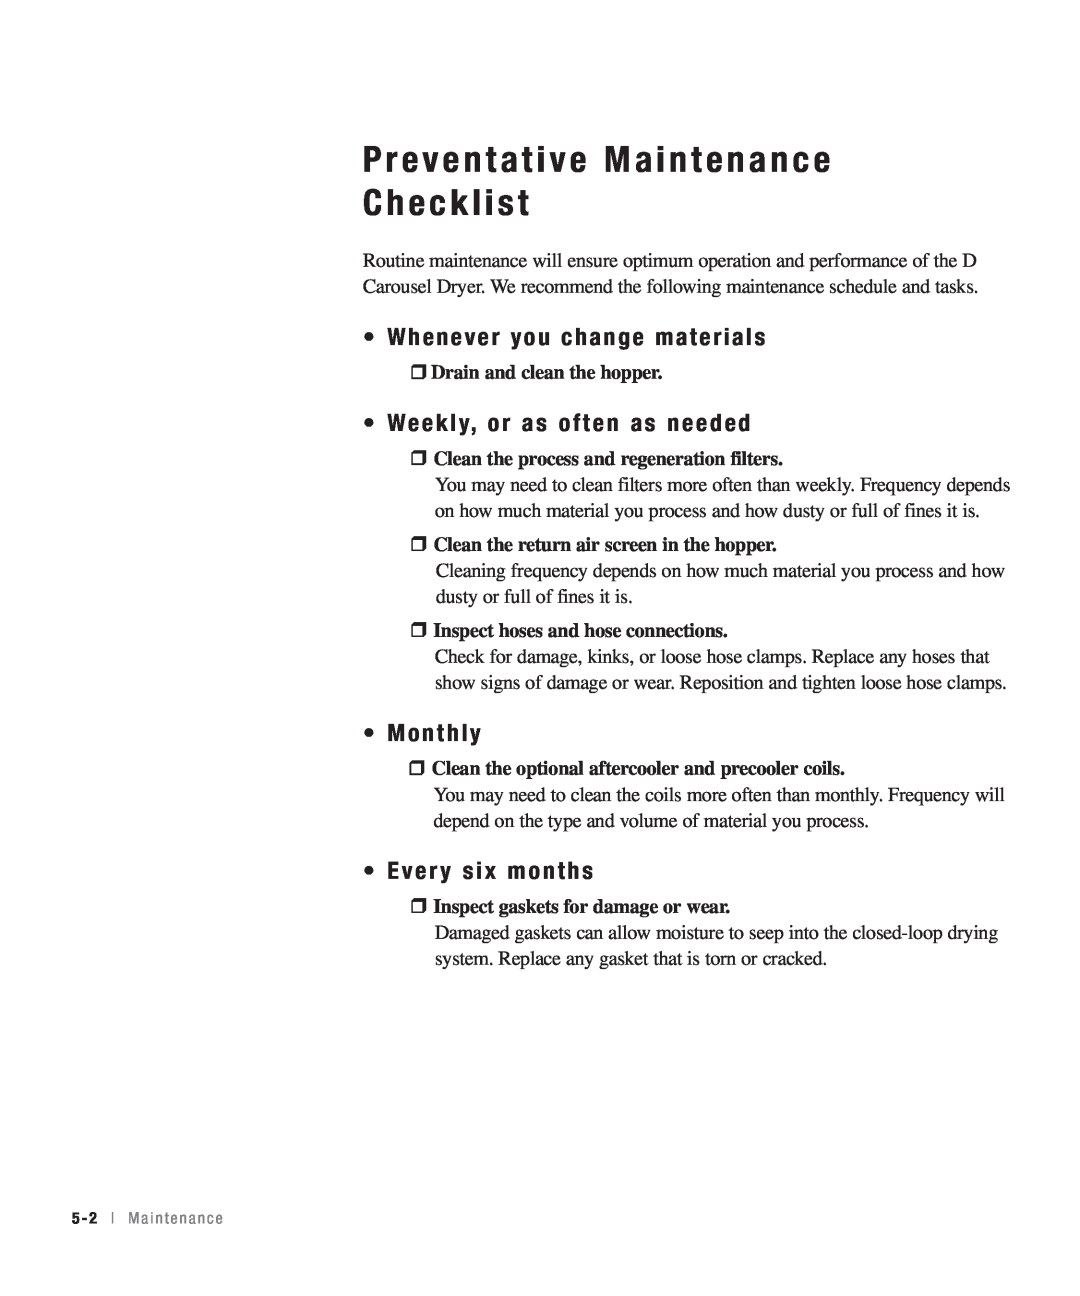 Conair 50, 25 Preventative Maintenance Checklist, •Whenever you change materials, •Weekly, or as often as needed, •Monthly 